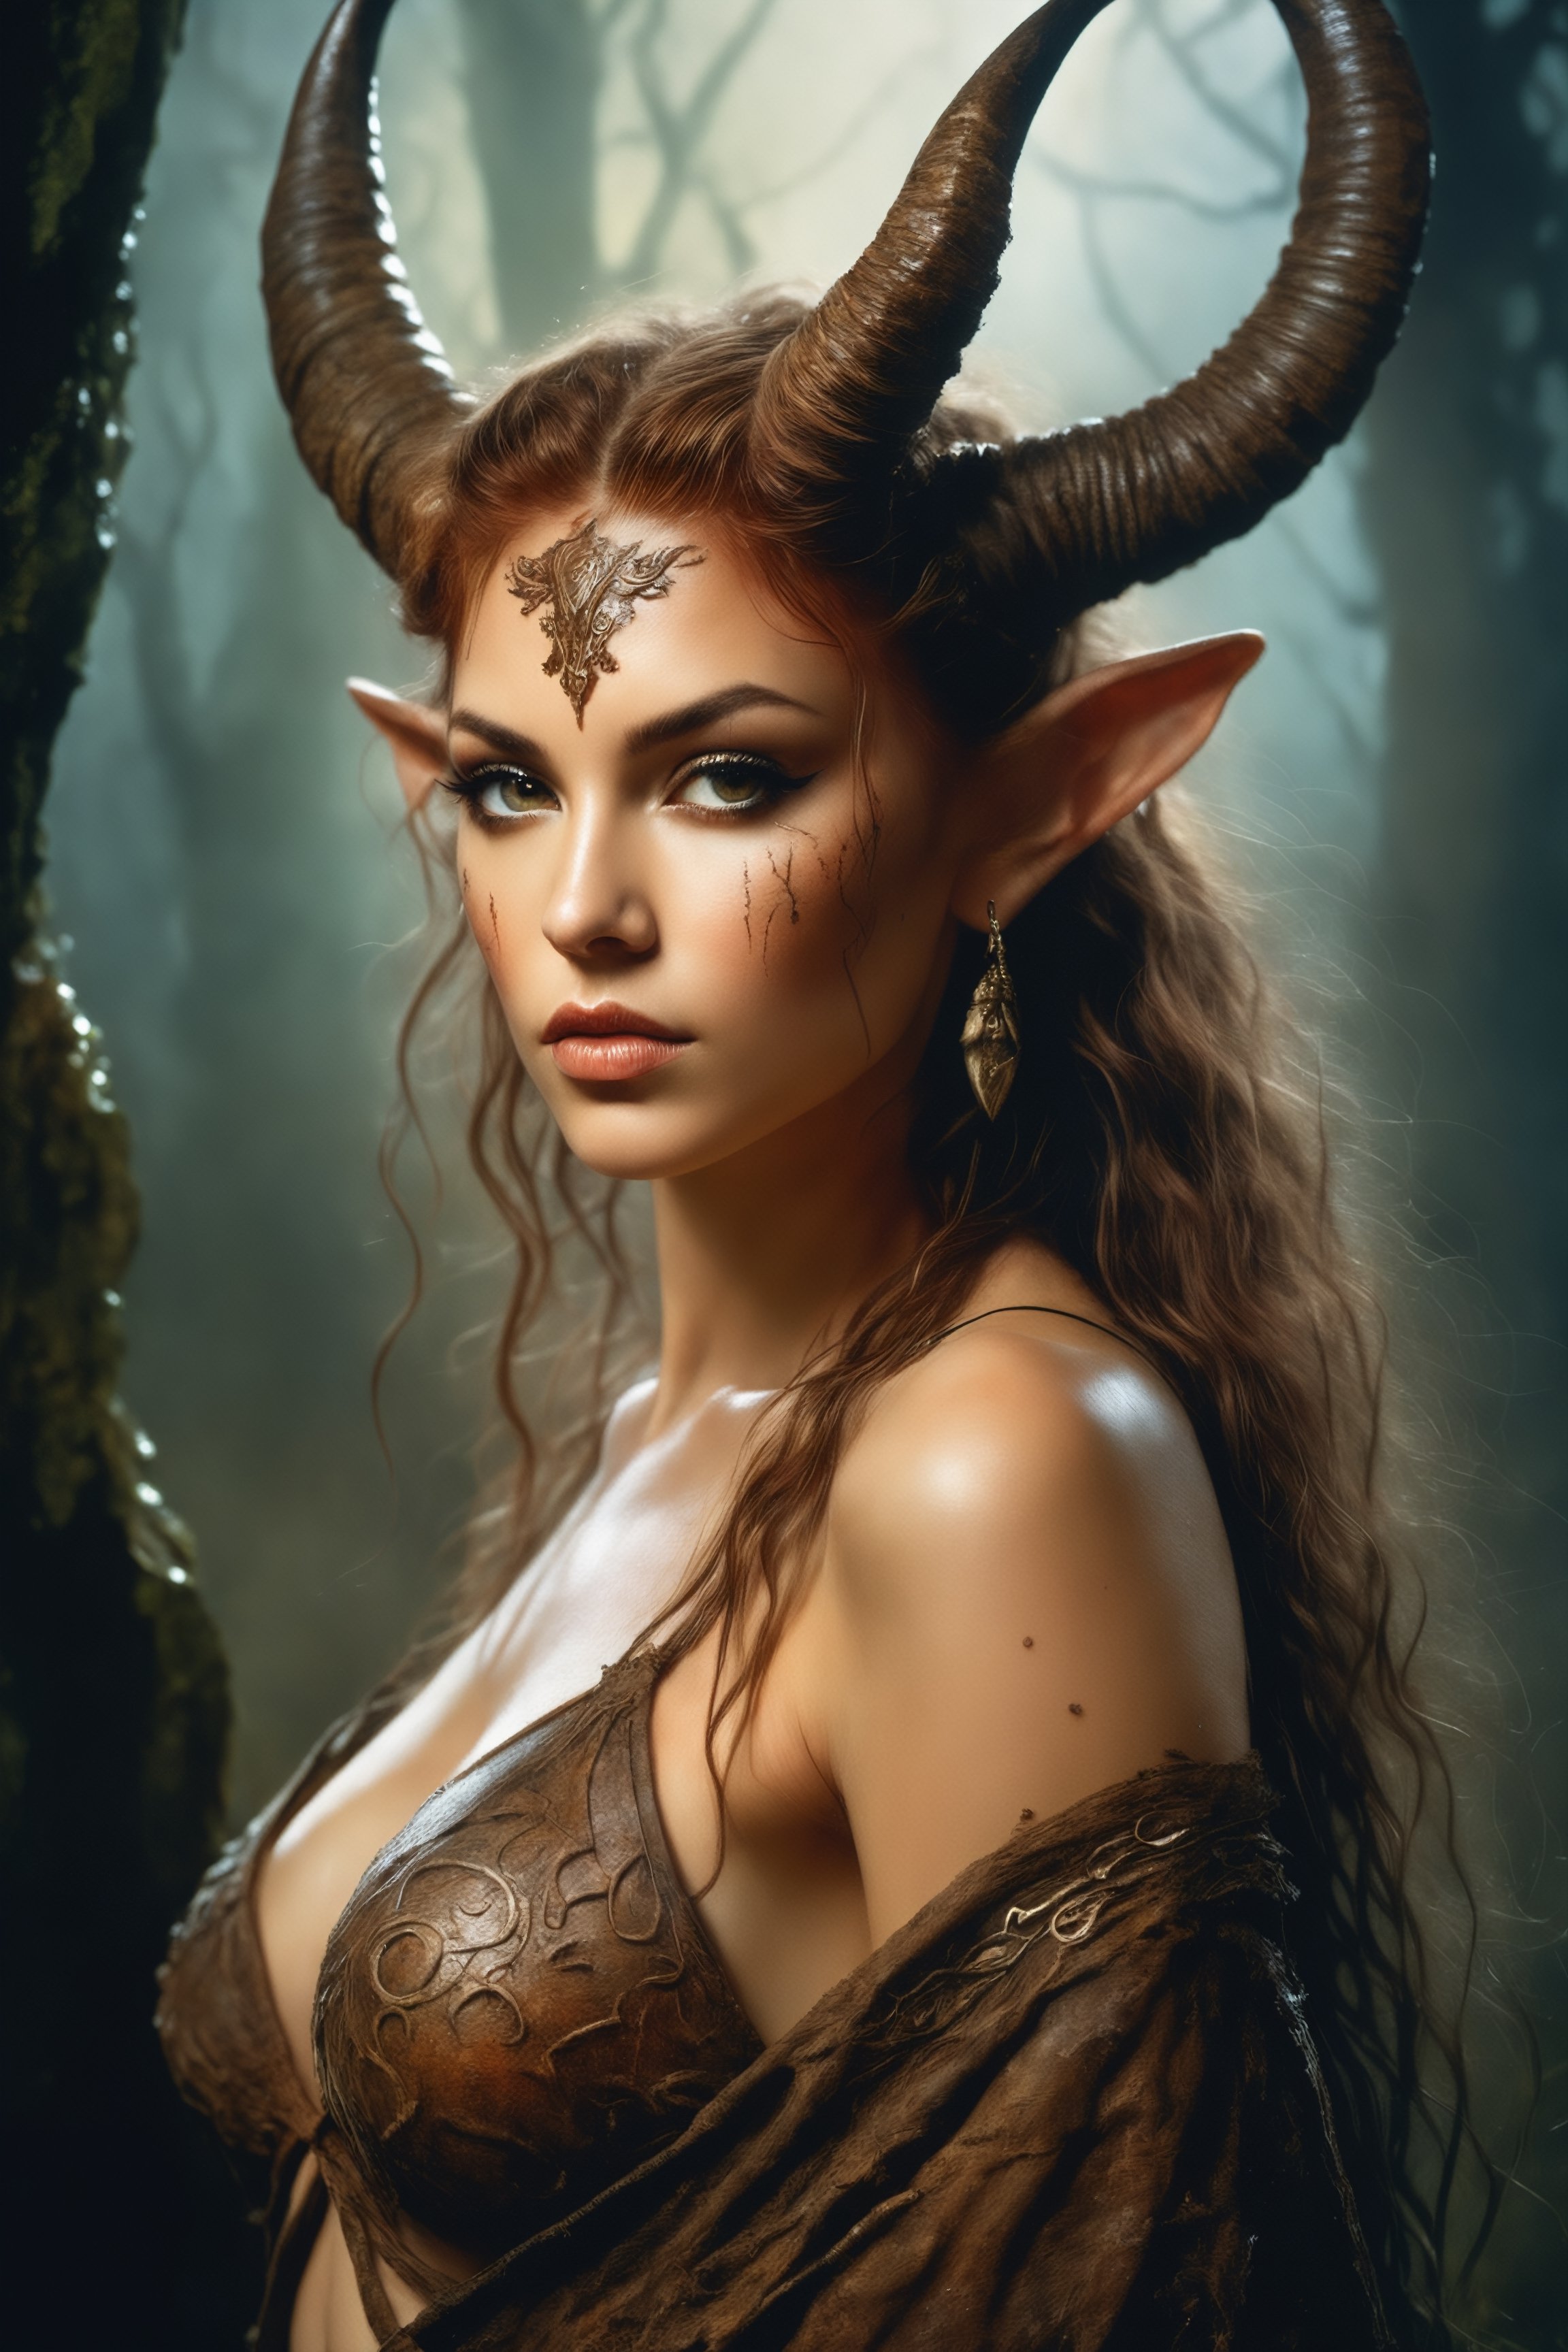 Luis royo style, acrylic paint and spray paint, 8K, rule of thirds, 
intricate, dark lighting, Flickr, well focused, atmospheric, dramatic, highly detailed, girl as a satyr full body portrait, seductive, sexy, intricate, digital painting, old english, whimsical background by marc simonetti, artwork by liam wong
